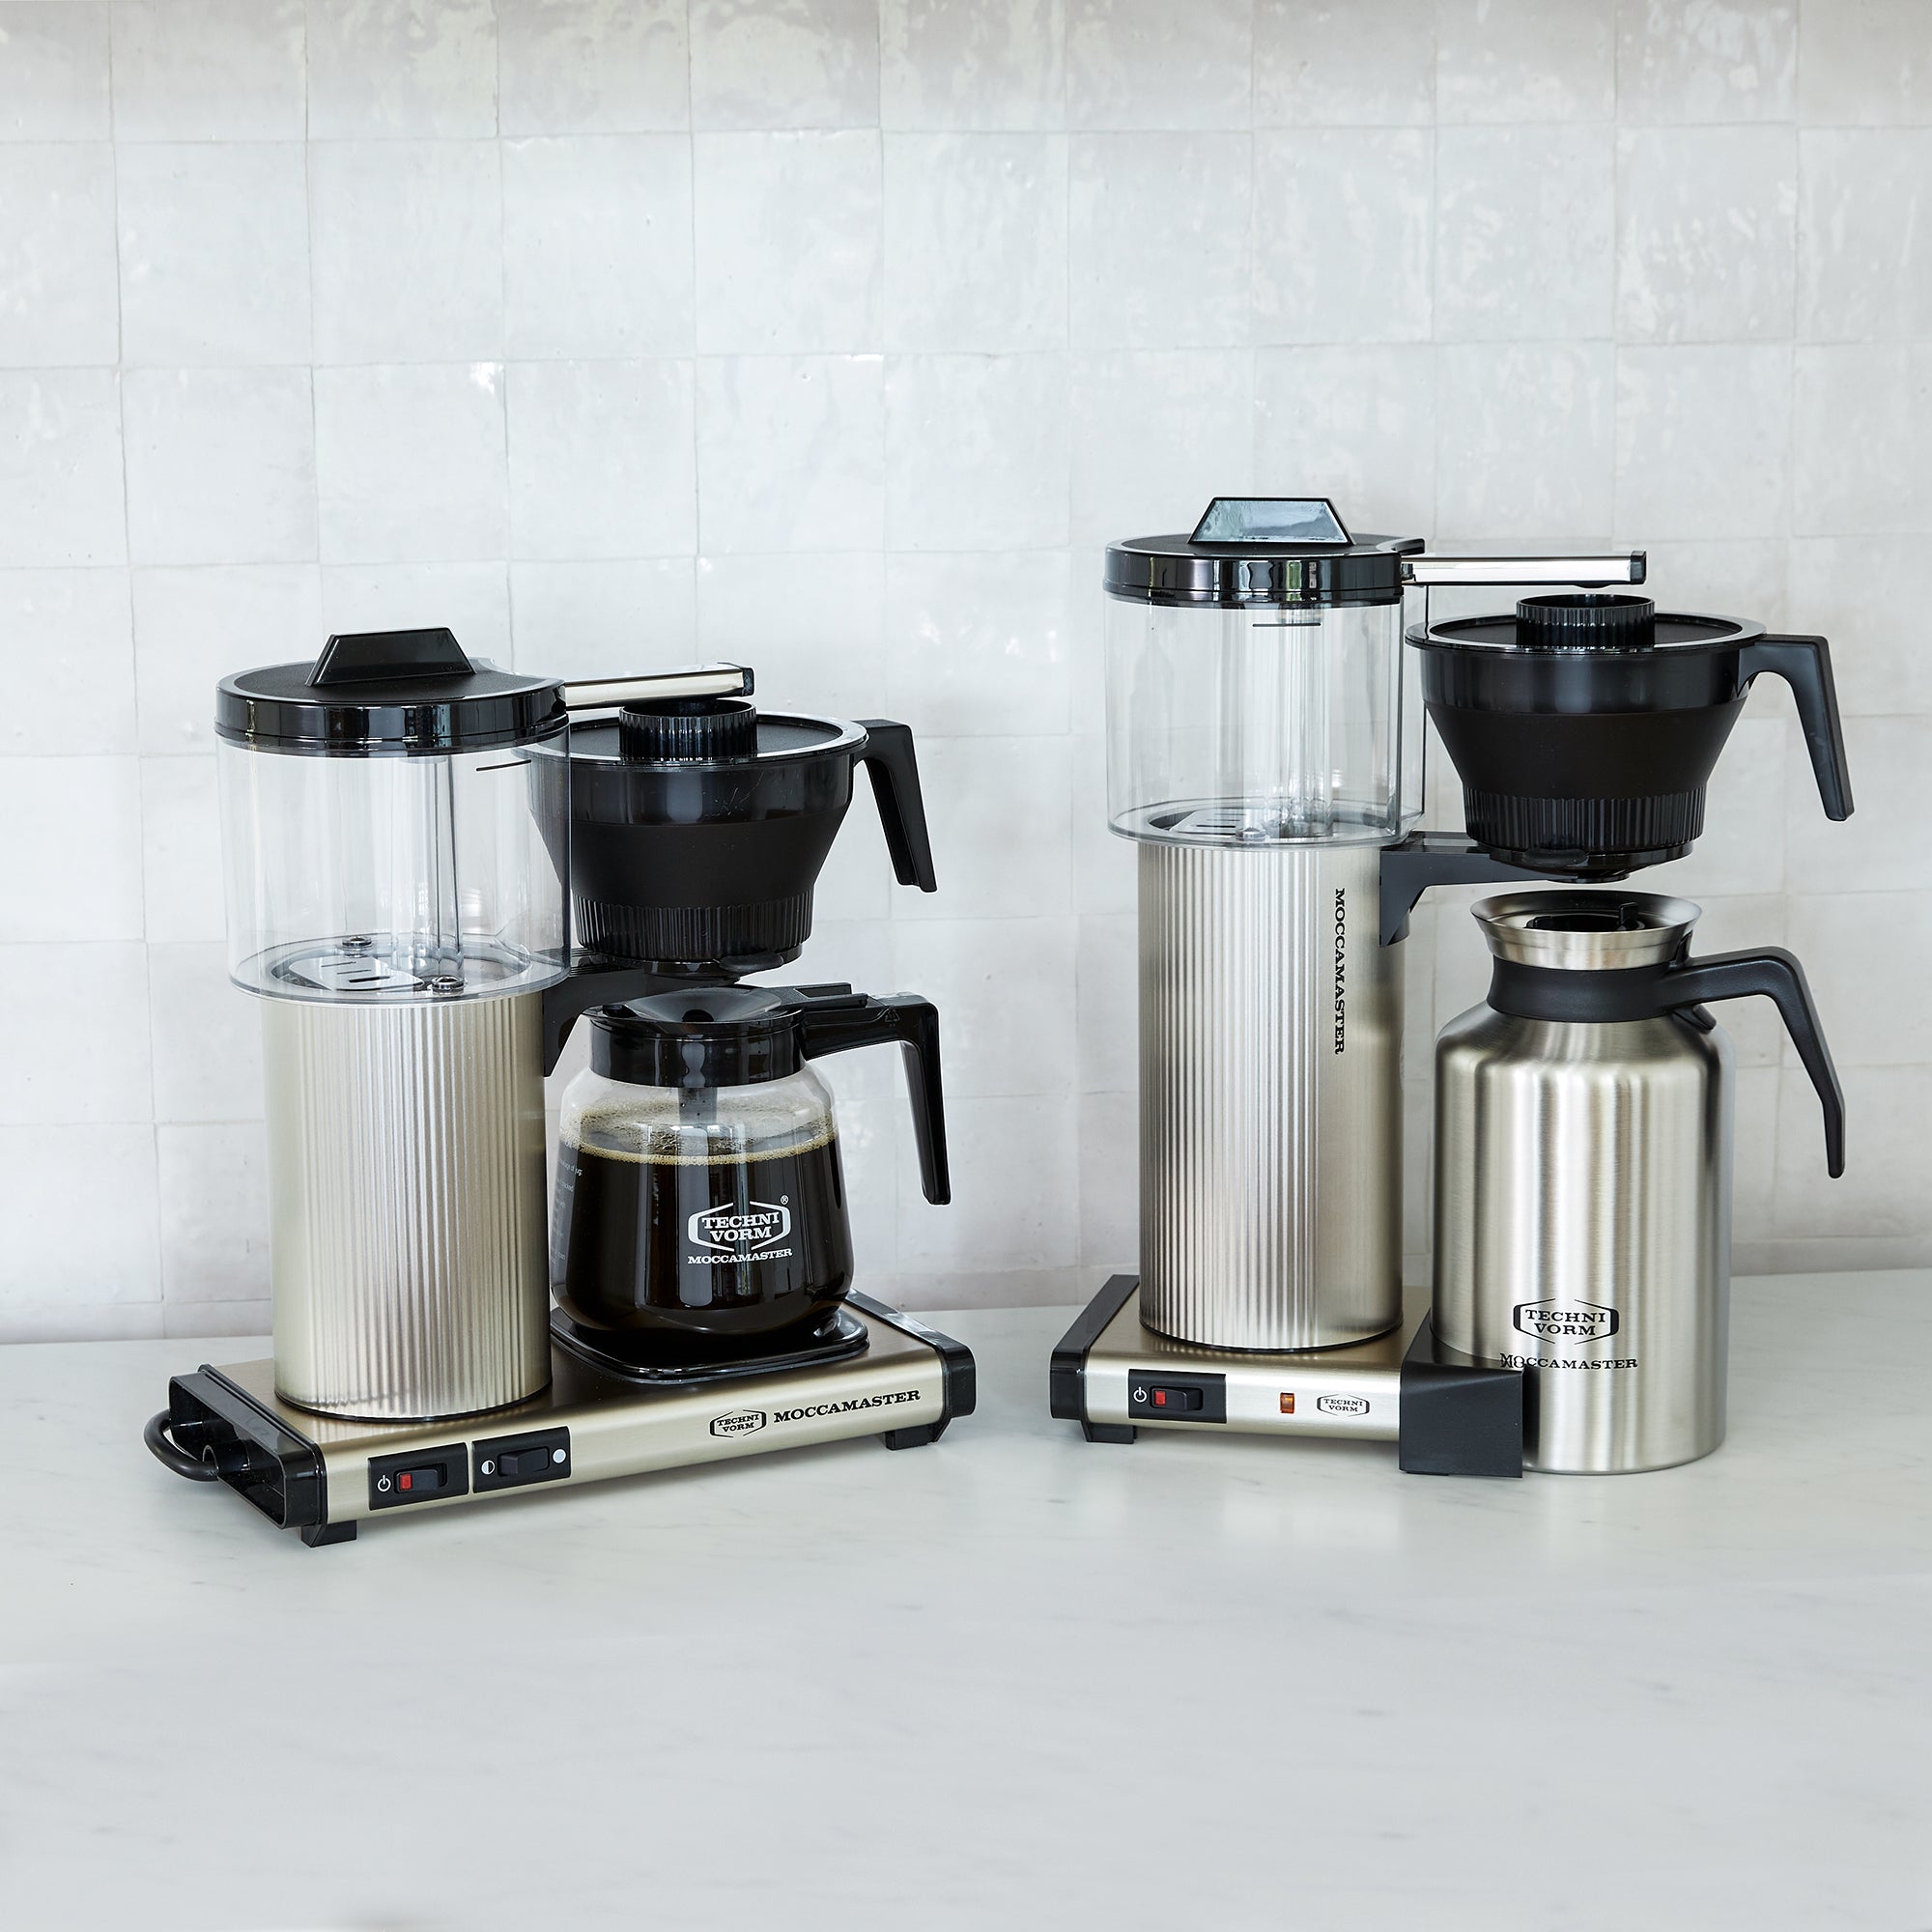 Moccamaster coffee machine with silver body, clear water reservoir, and black glass carafe filled with coffee